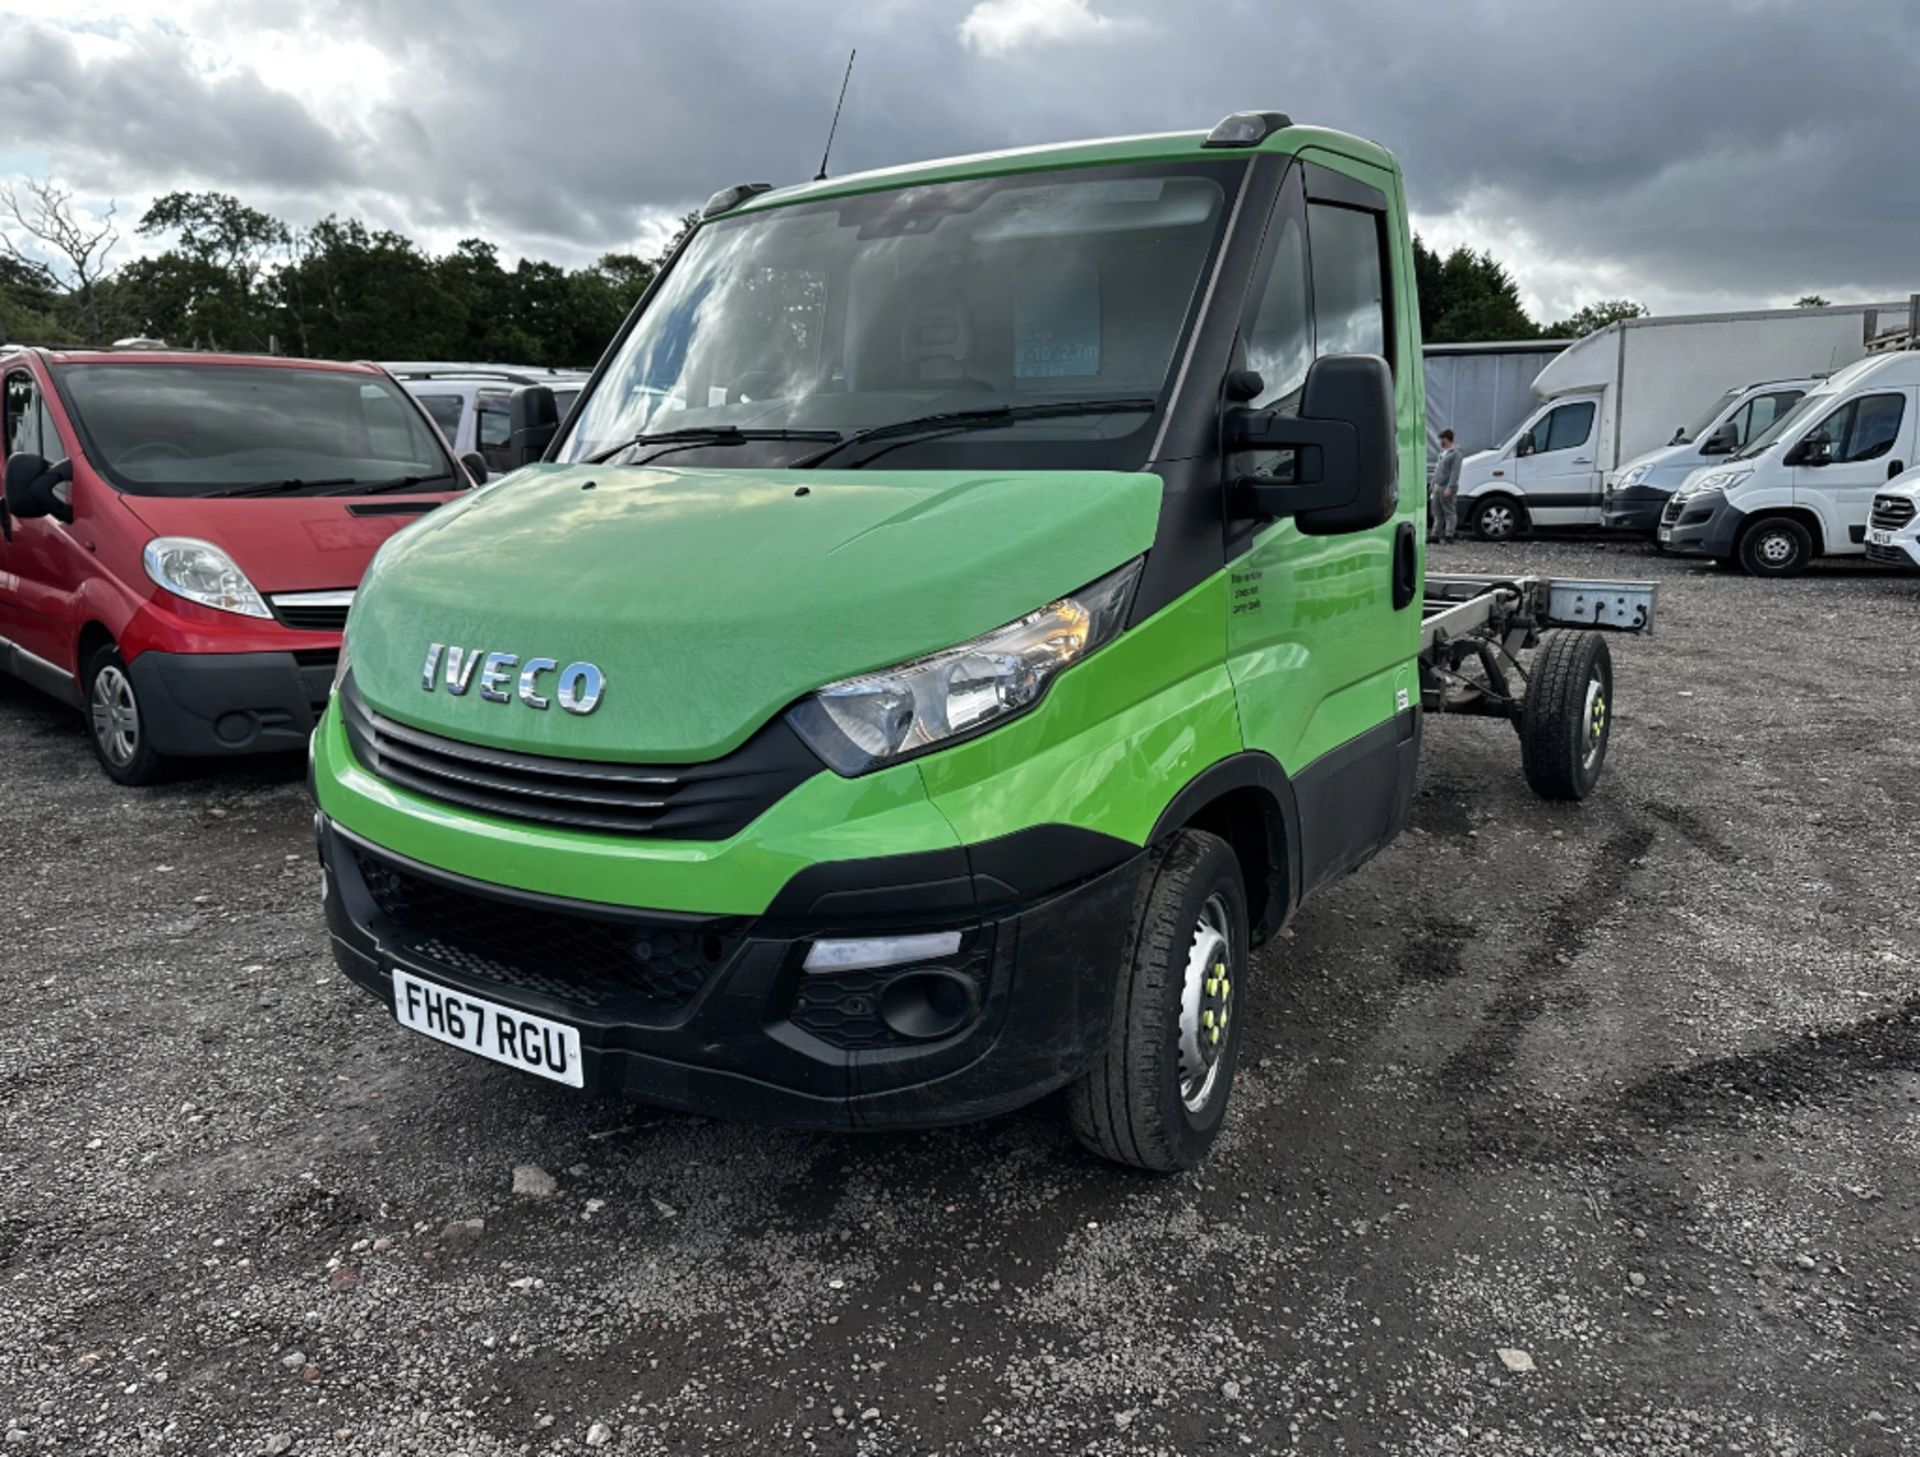 AUTOMATIC!! IVECO: STARTS AND RUNS PERFECTLY - MOT: FEB 2024 **(NO VAT ON HAMMER)** - Image 14 of 14